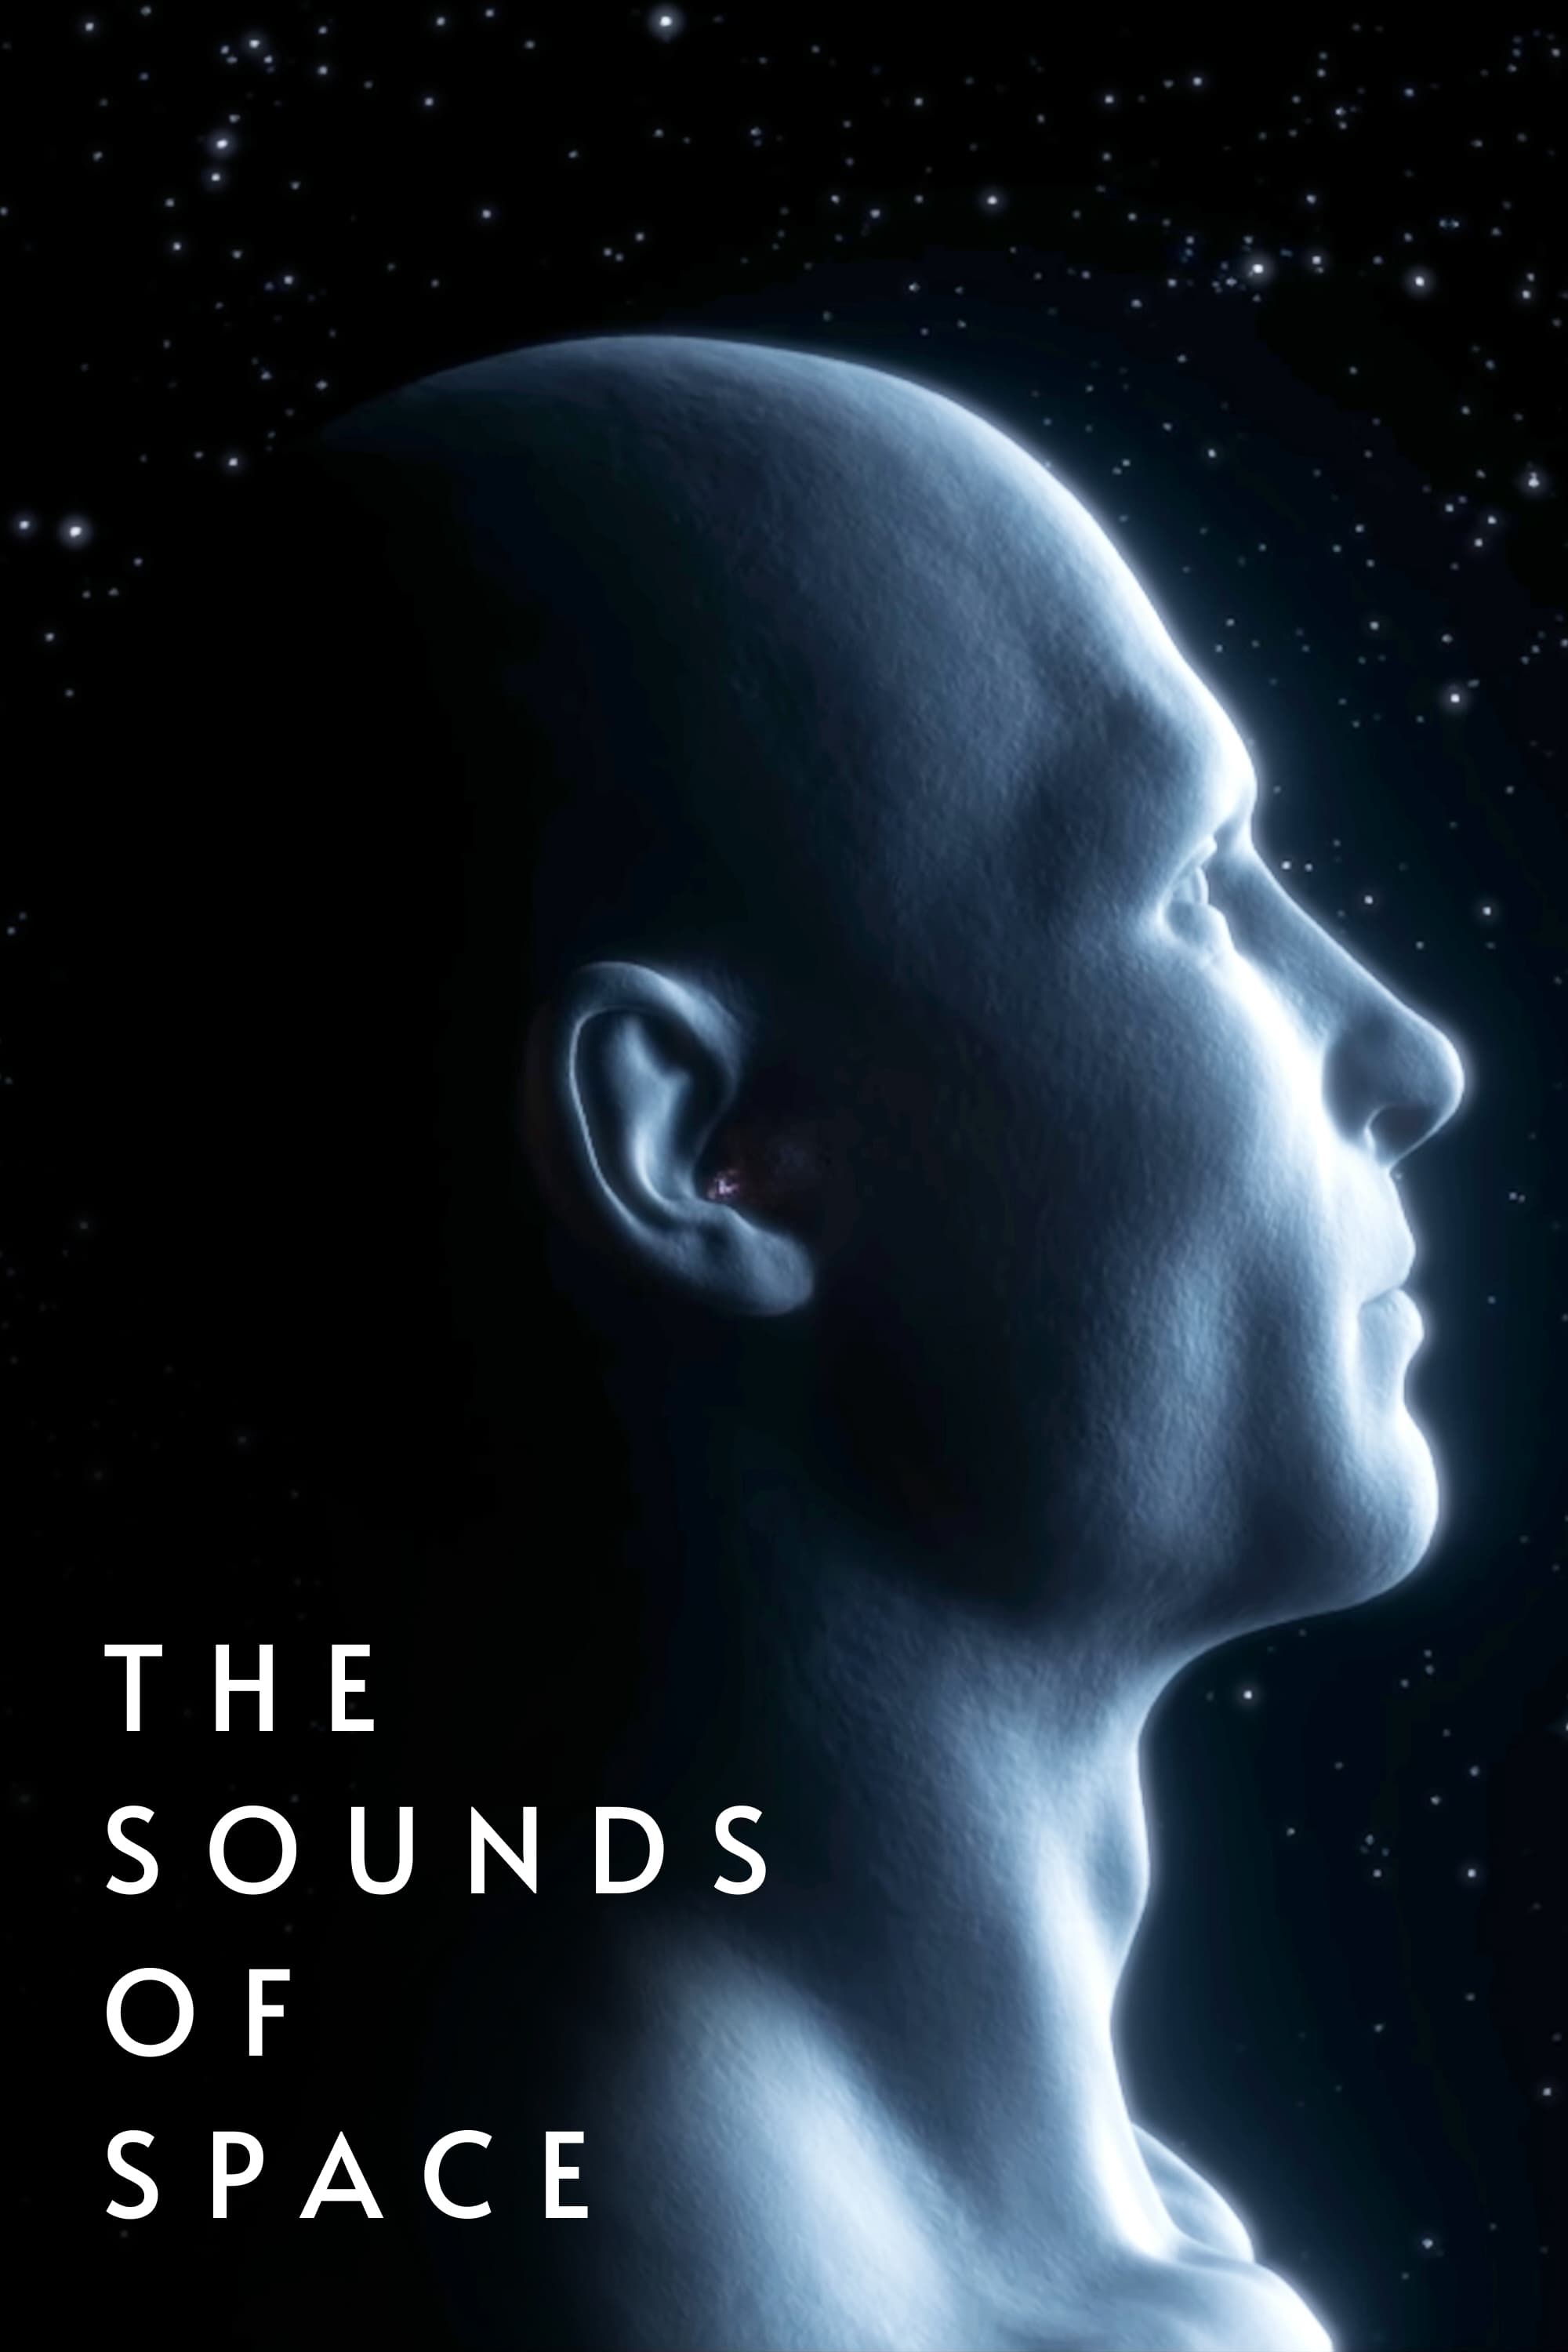 The Sounds of Space